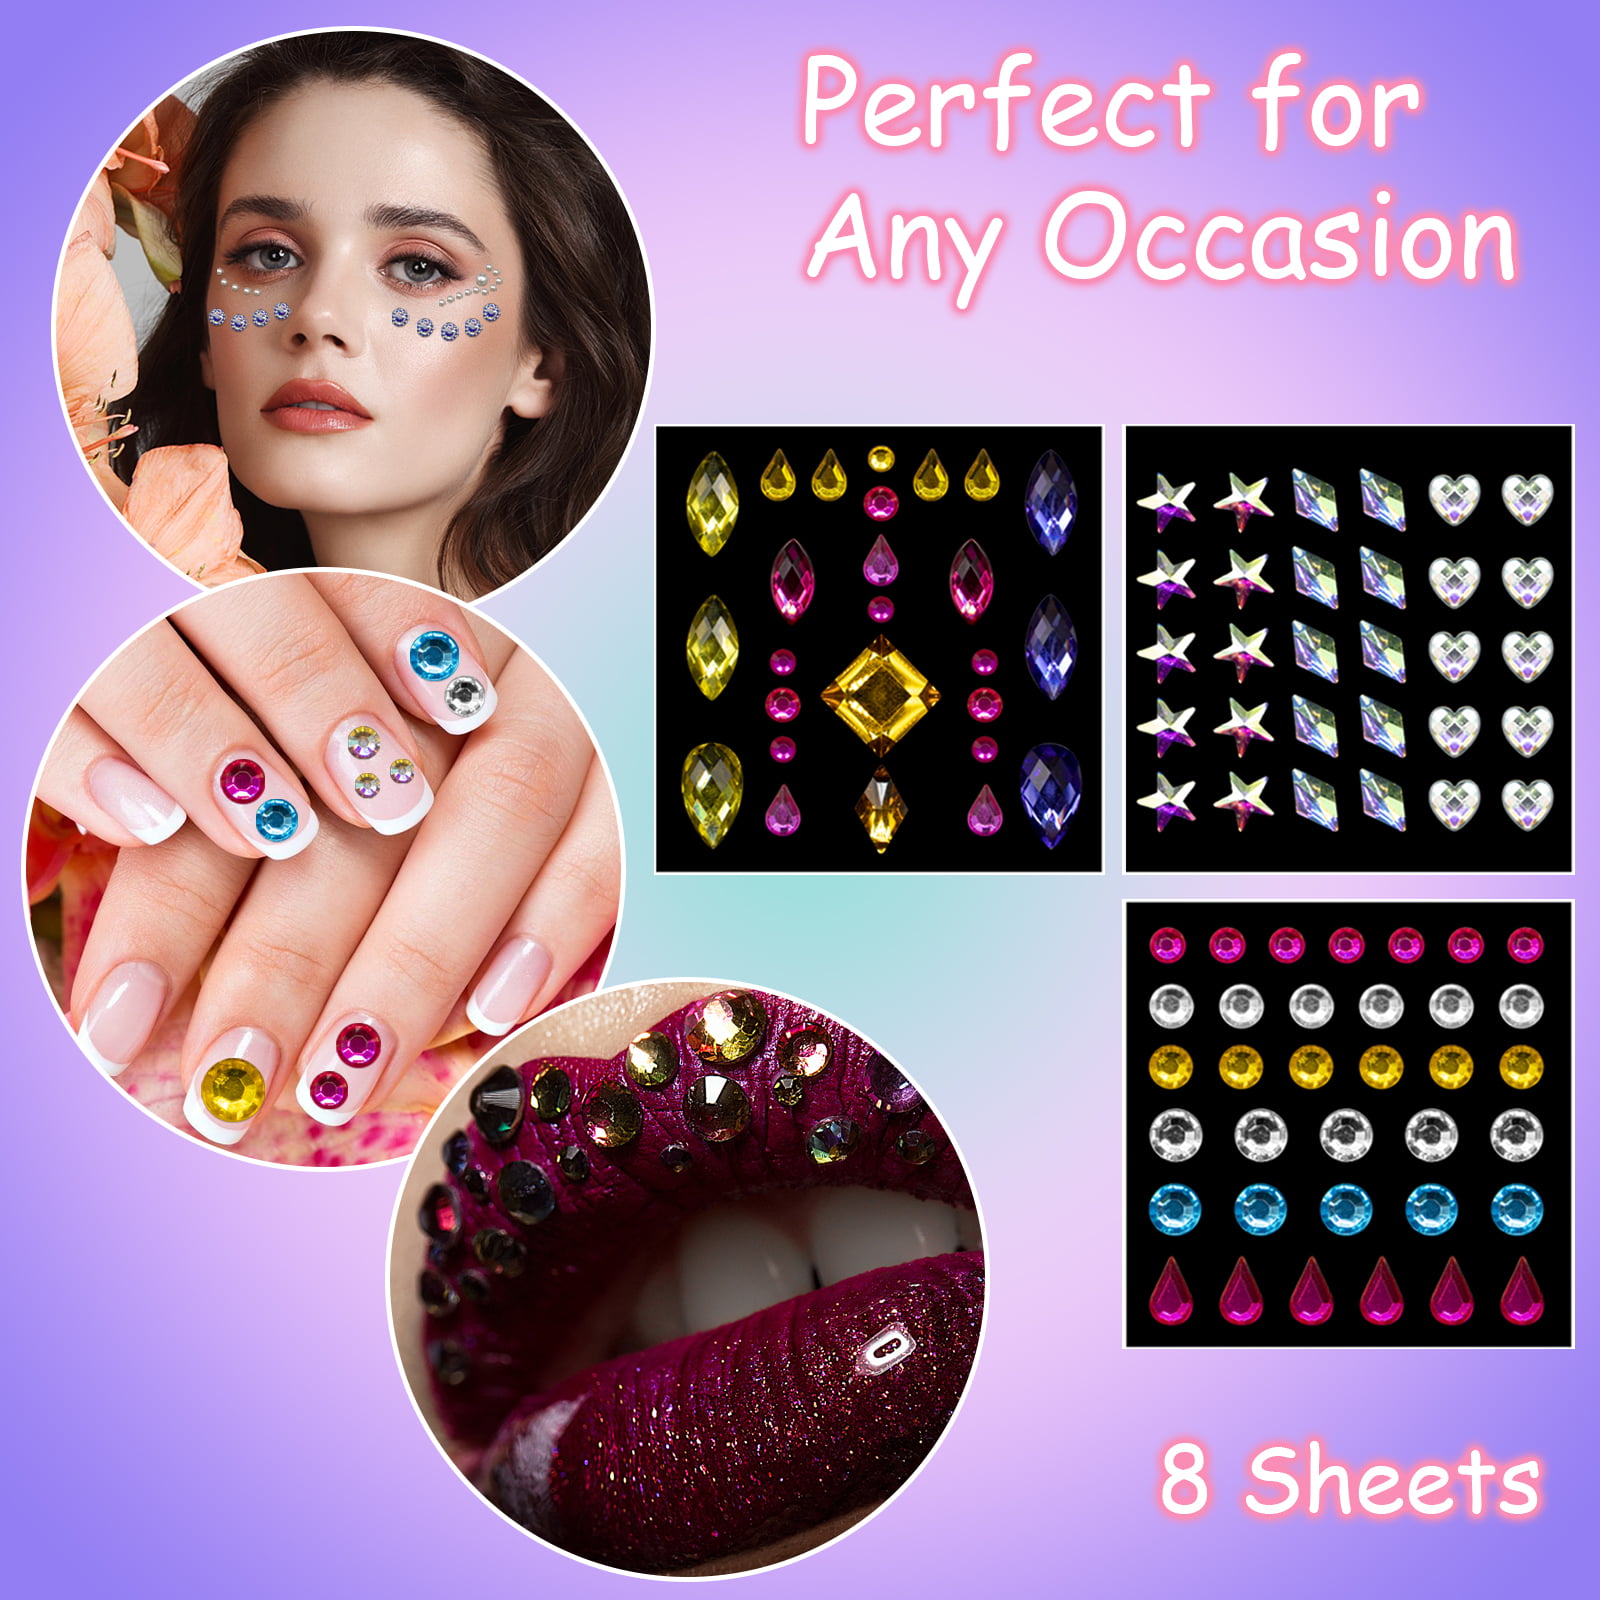 12 Sheet Self Adhesive Rhinestone Stickers For Nail Art Decoration Sticker  Face Gems For Women And Girls From Beasy113, $33.64